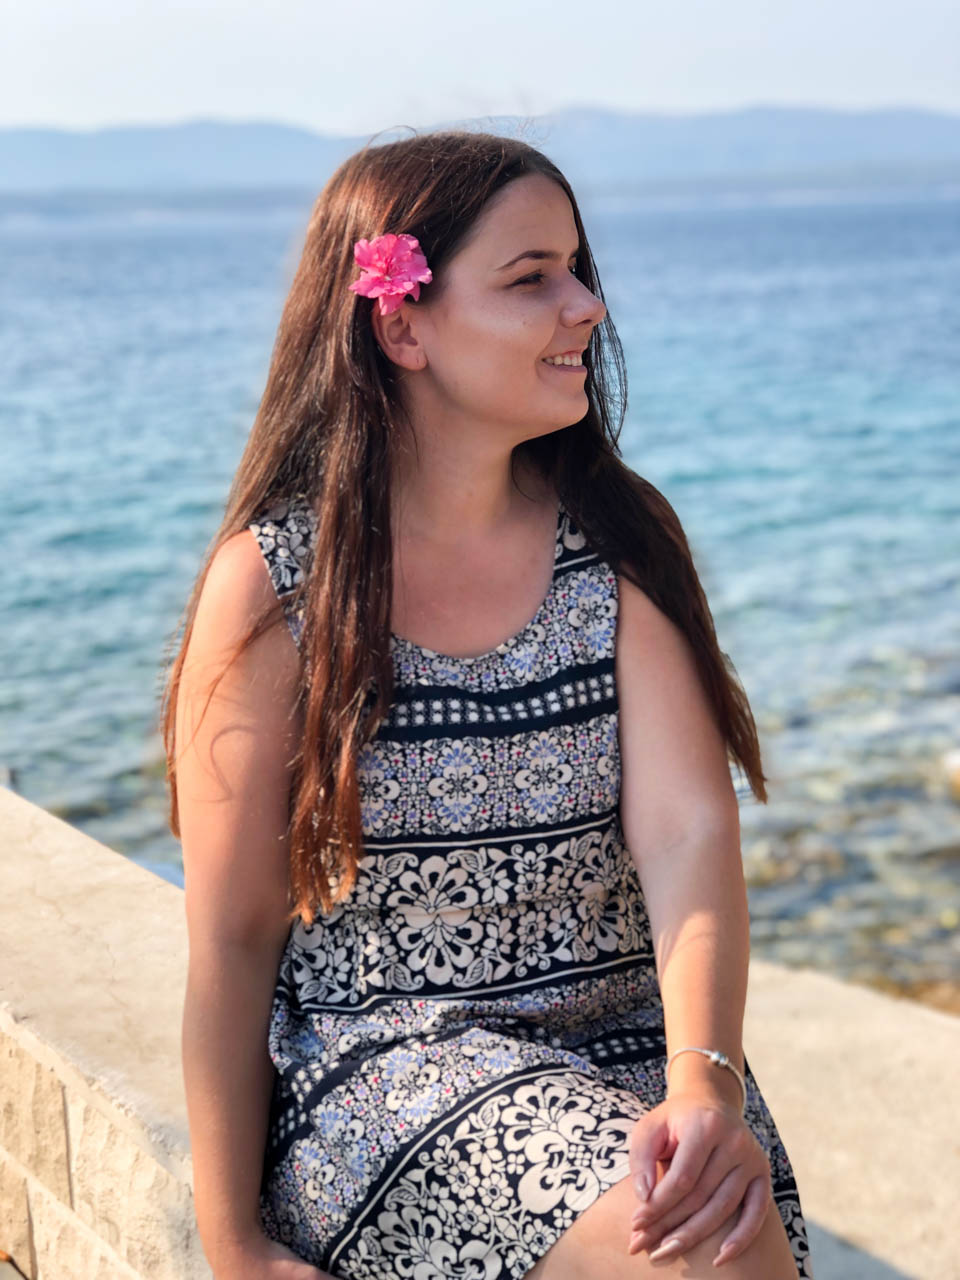 A smiling girl in a summer dress with a pink flower in her hair sitting on top of a stone wall with the Adriatic Sea behind her